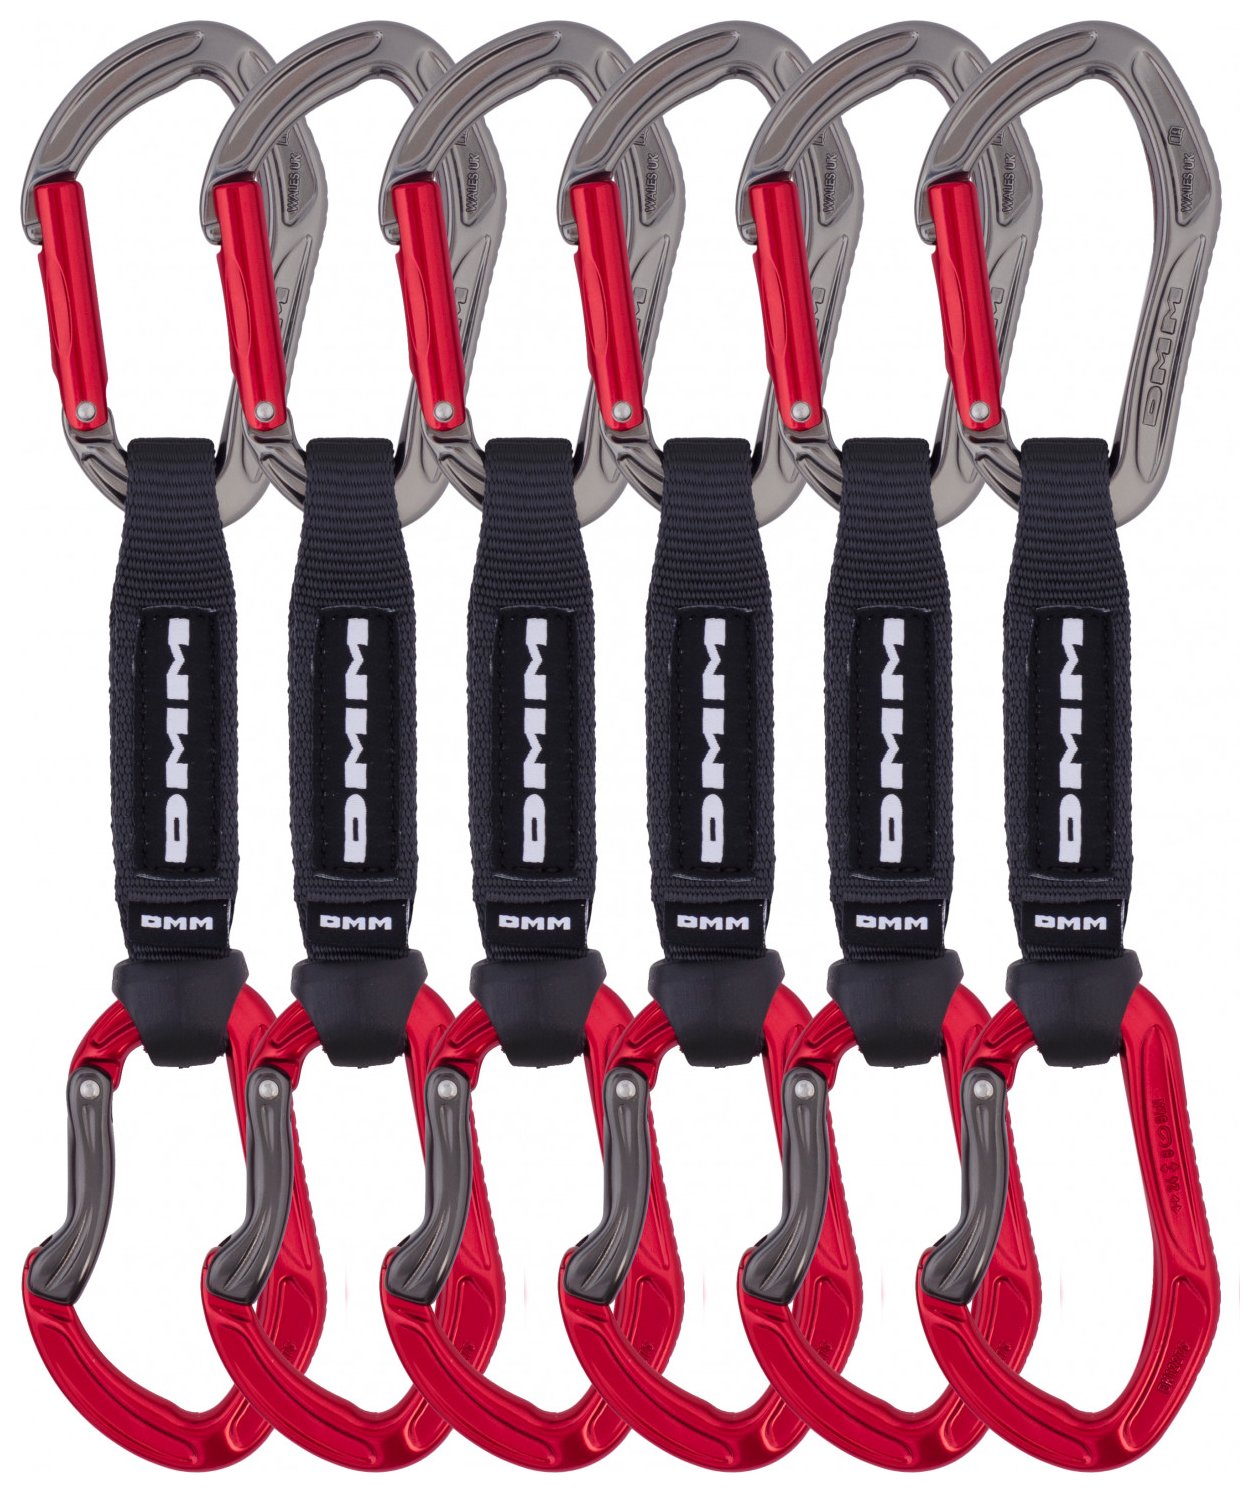 Alpha Sport Quickdraw (12cm) - red, quickdraws - 6 pack